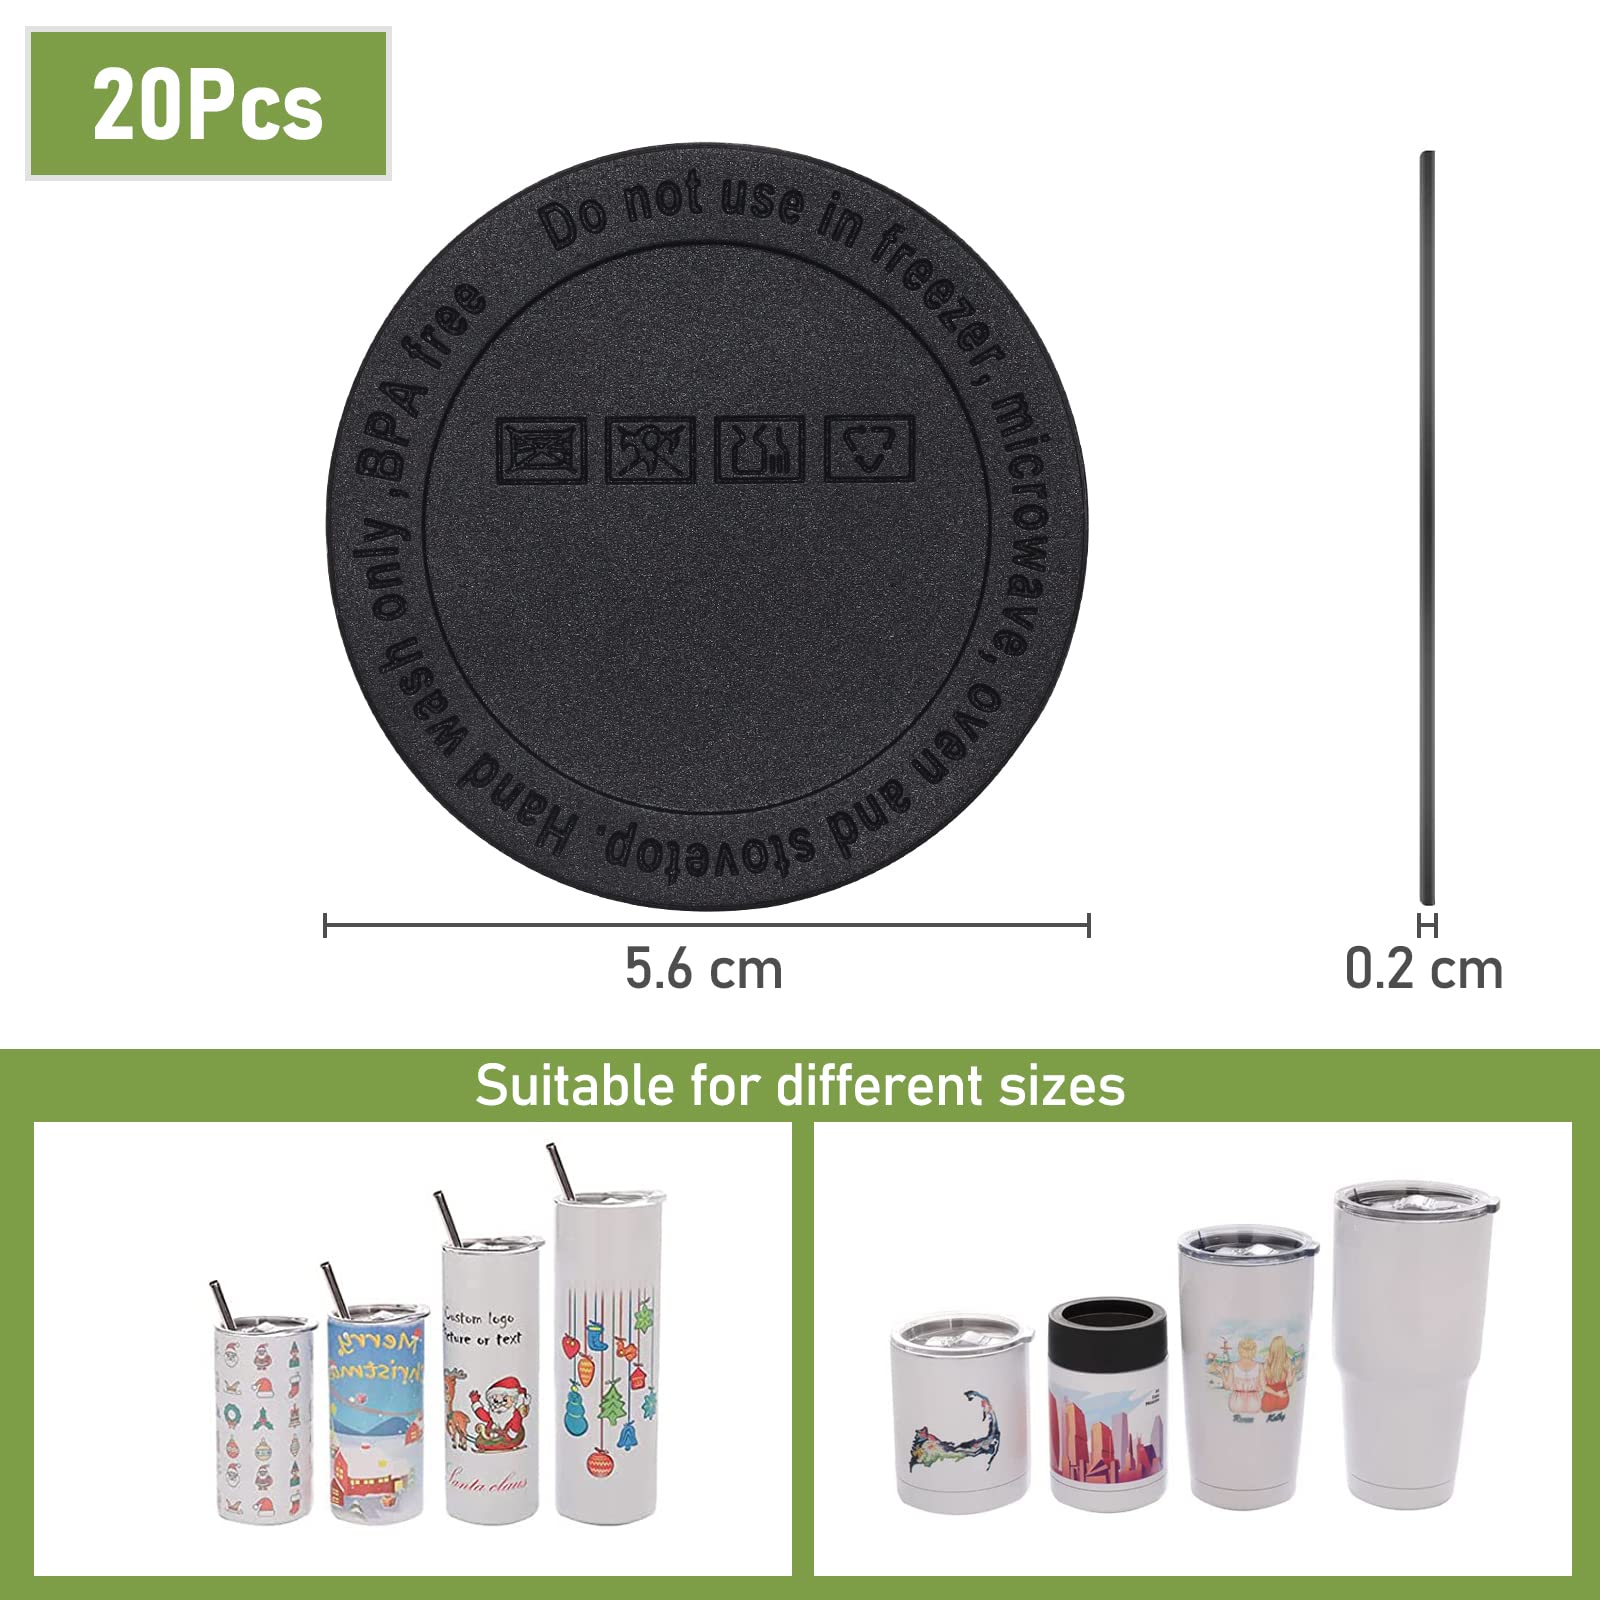 20Pcs Rubber Bottoms for Sublimation Tumblers,Protective Anti-Slip Silicone Bottoms with Adhesive for Skinny Tumblers, Thermal Bottle,Mason Jars (56mm , Black)